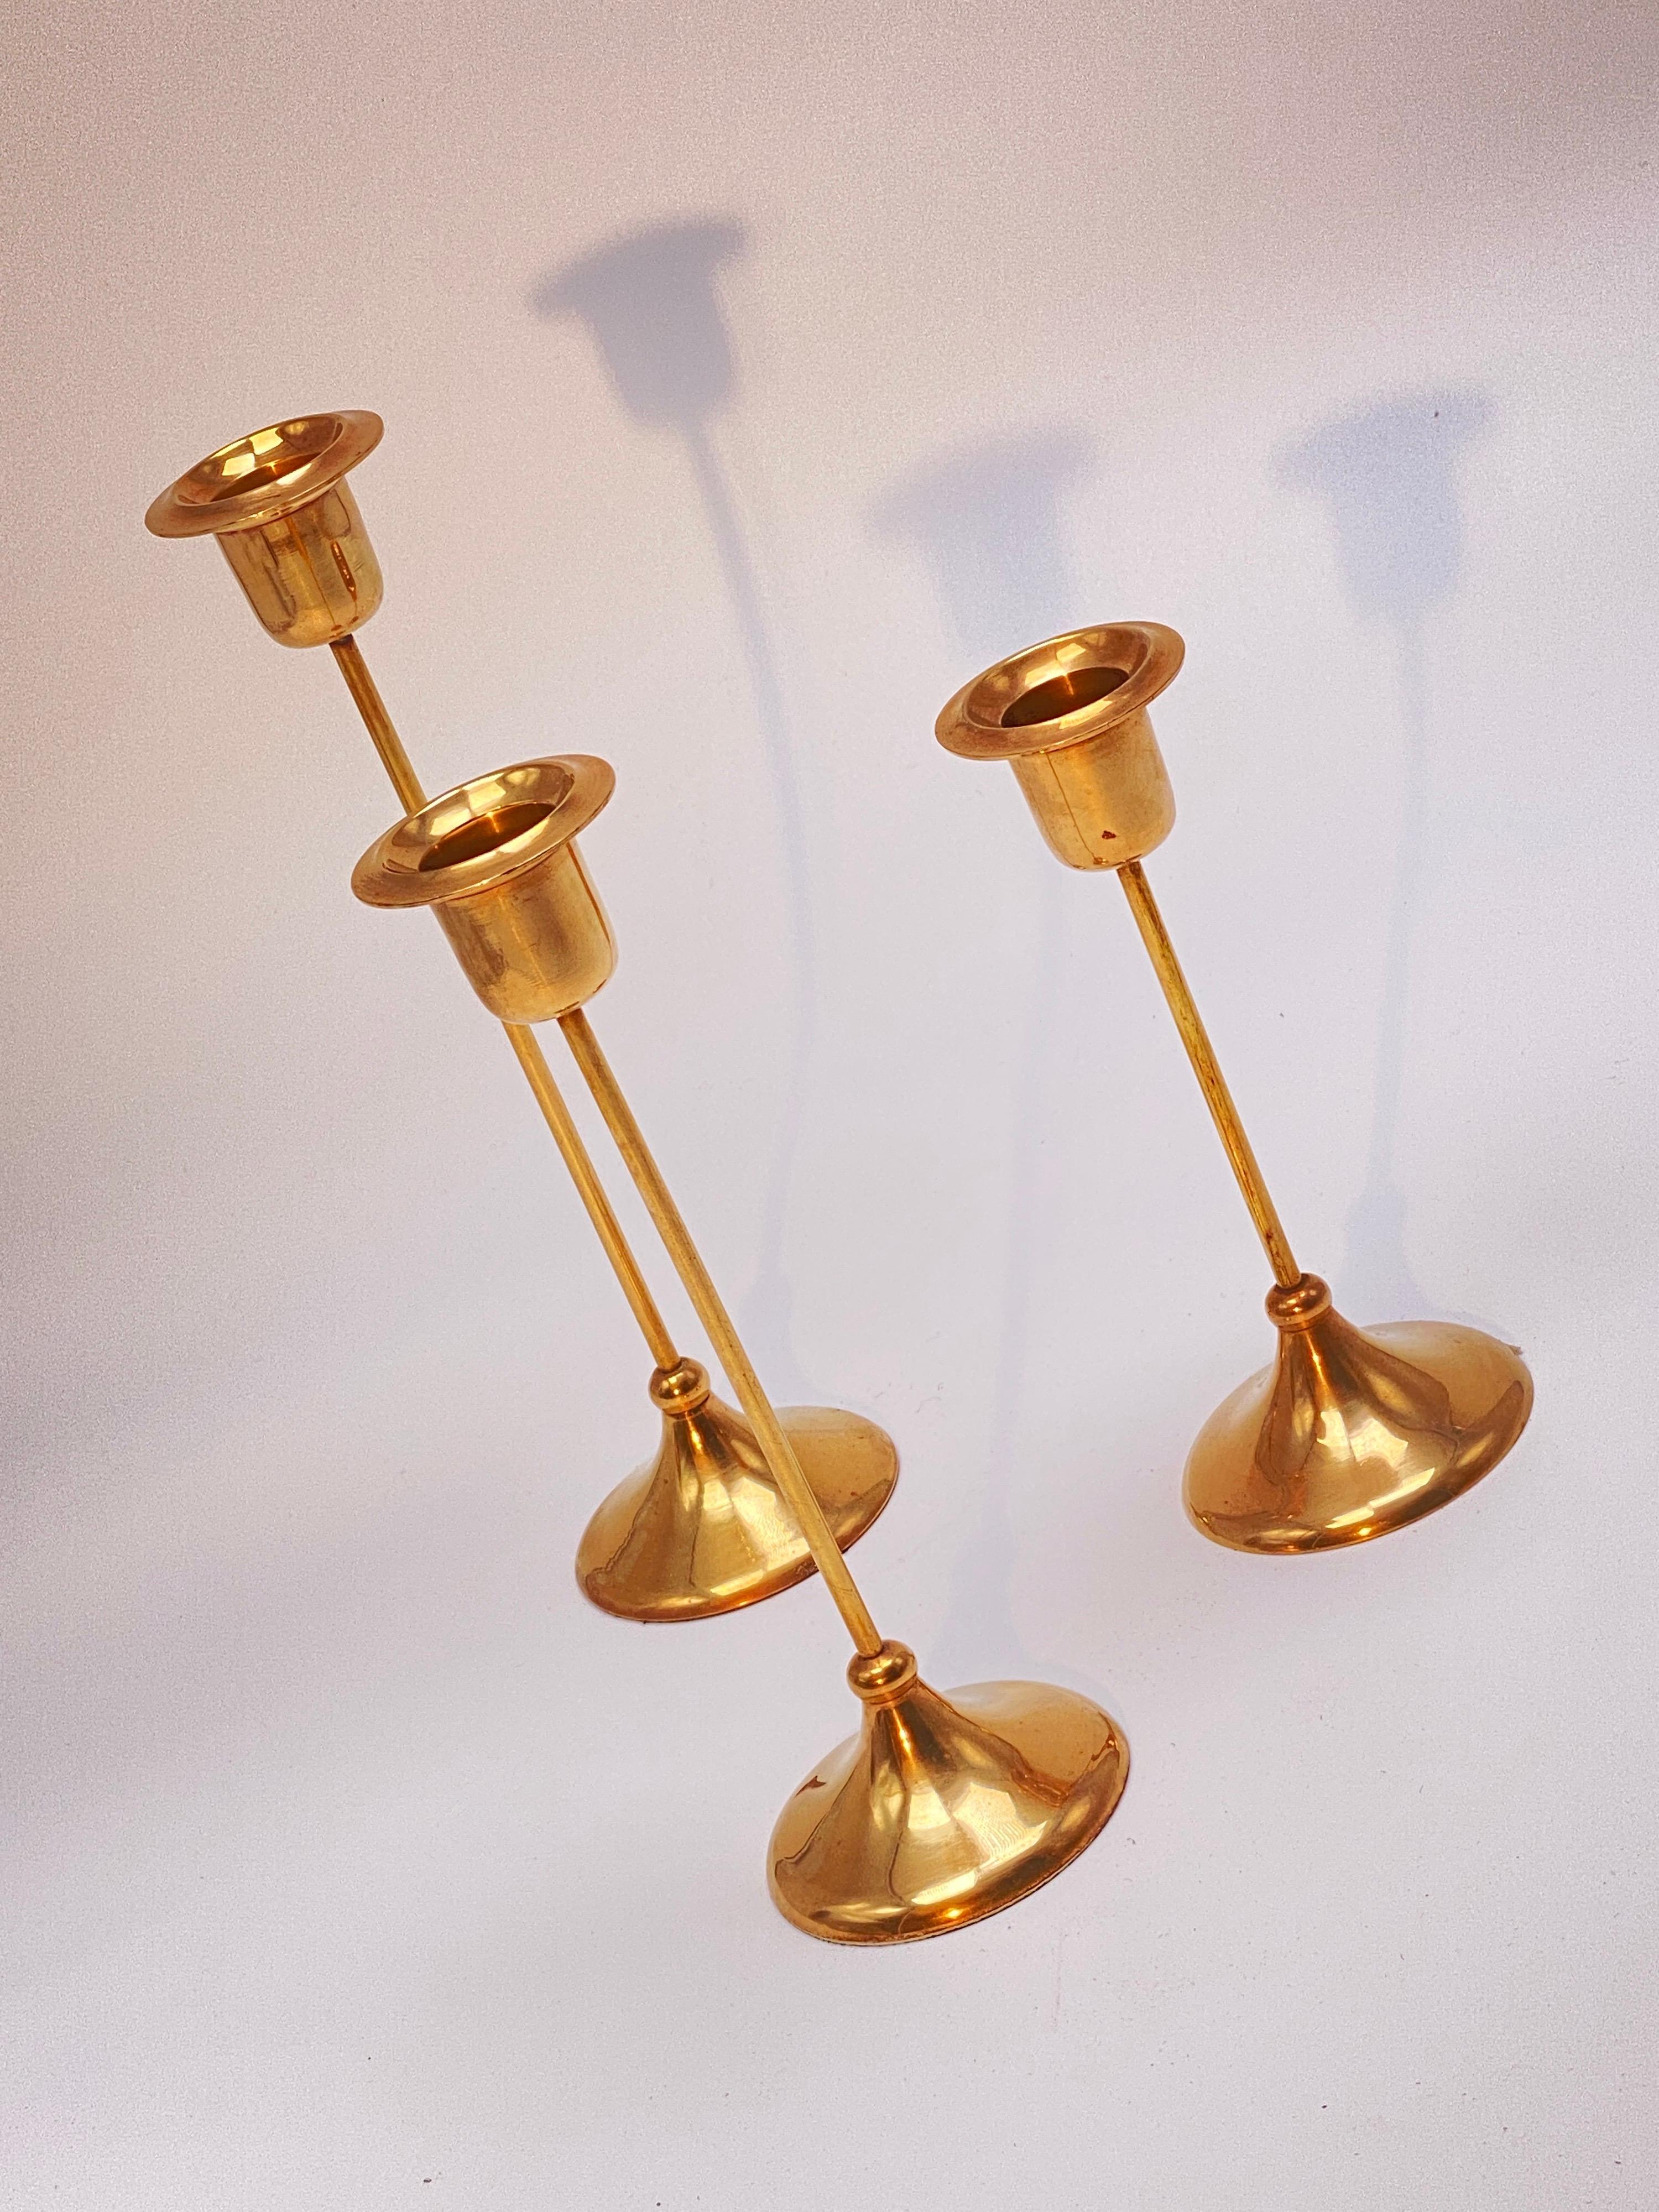 Candlesticks in Brass, Sweden 1960, Brown Color, Set of Three For Sale 2